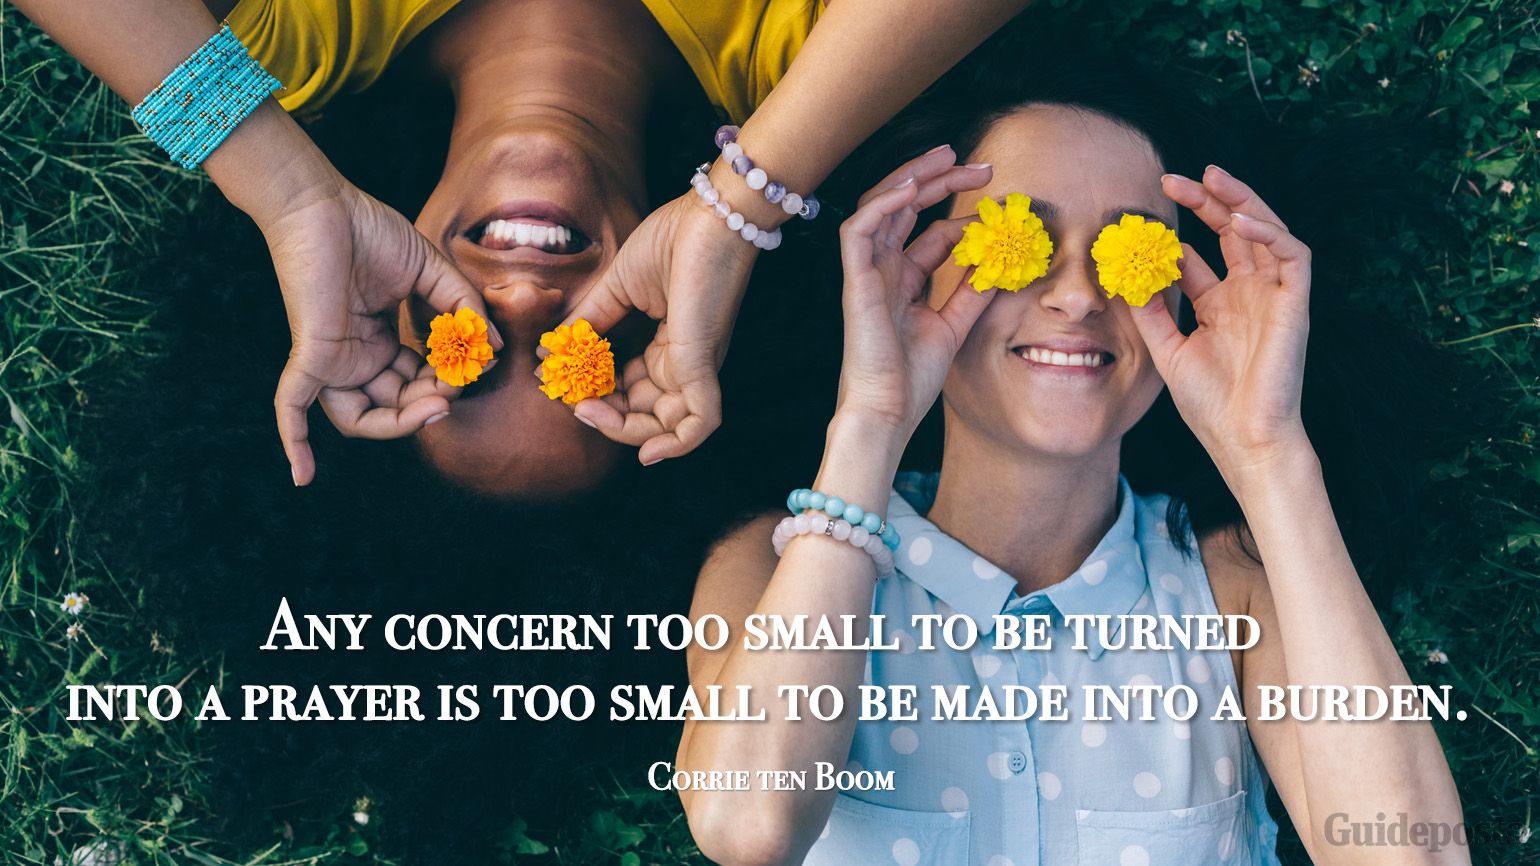 "Any concern too small to be turned into a prayer is too small to be made into a burden." Inspiring Corrie ten Boom quotes